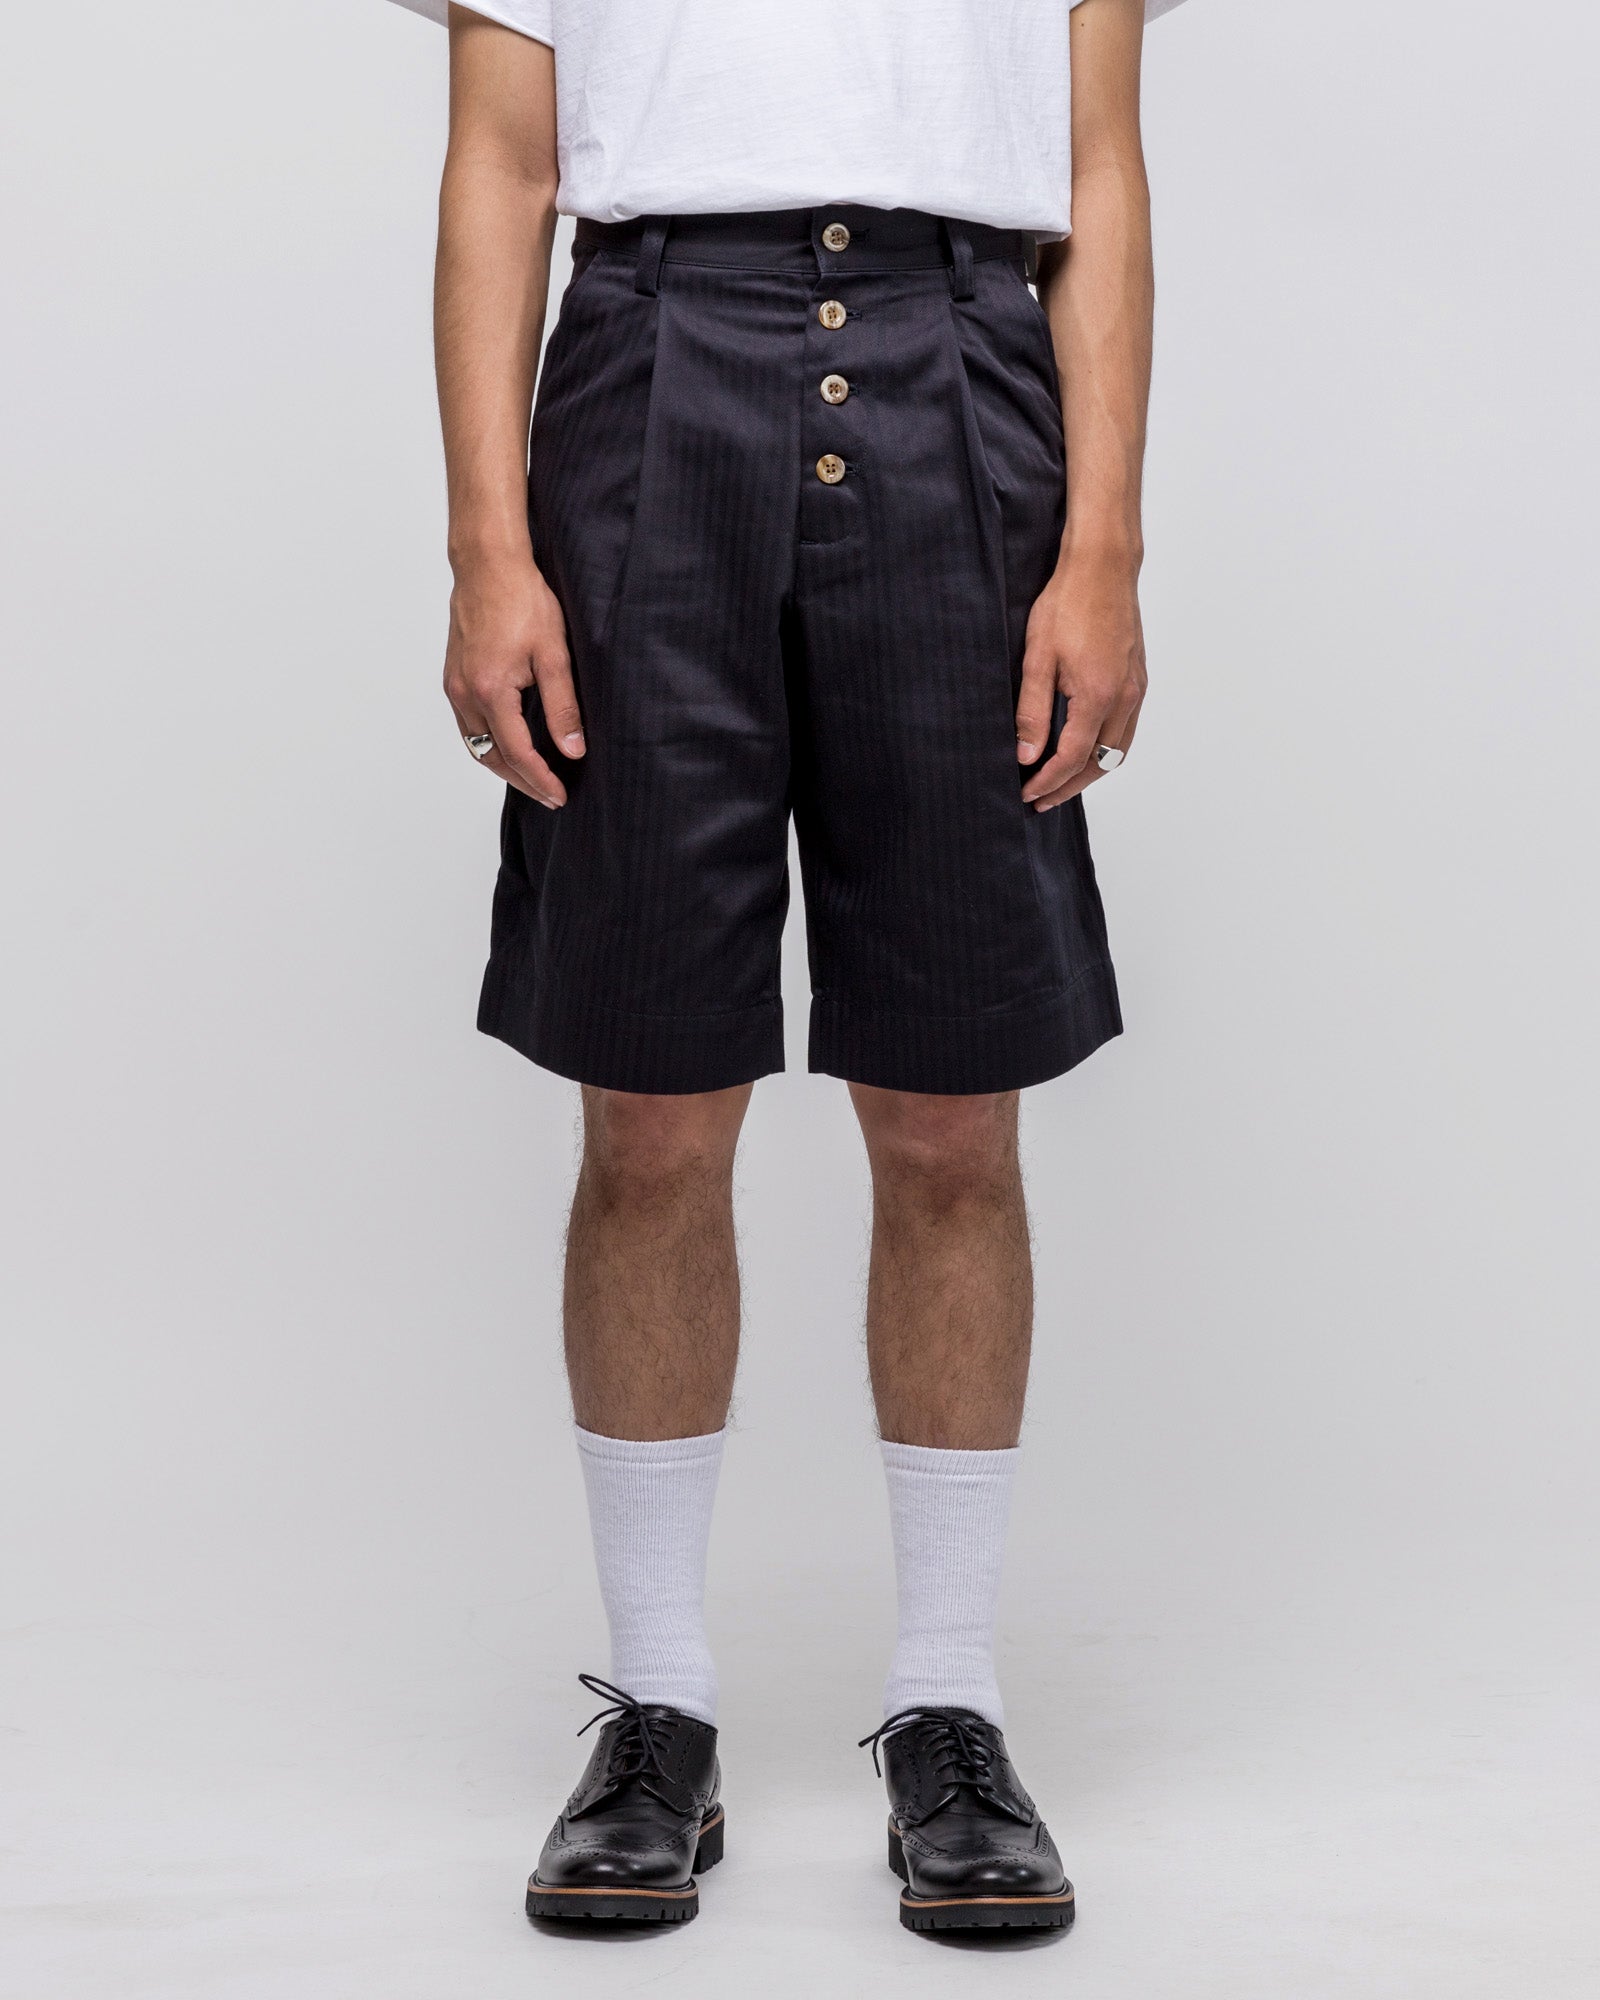 Dreamers Shorts in Navy